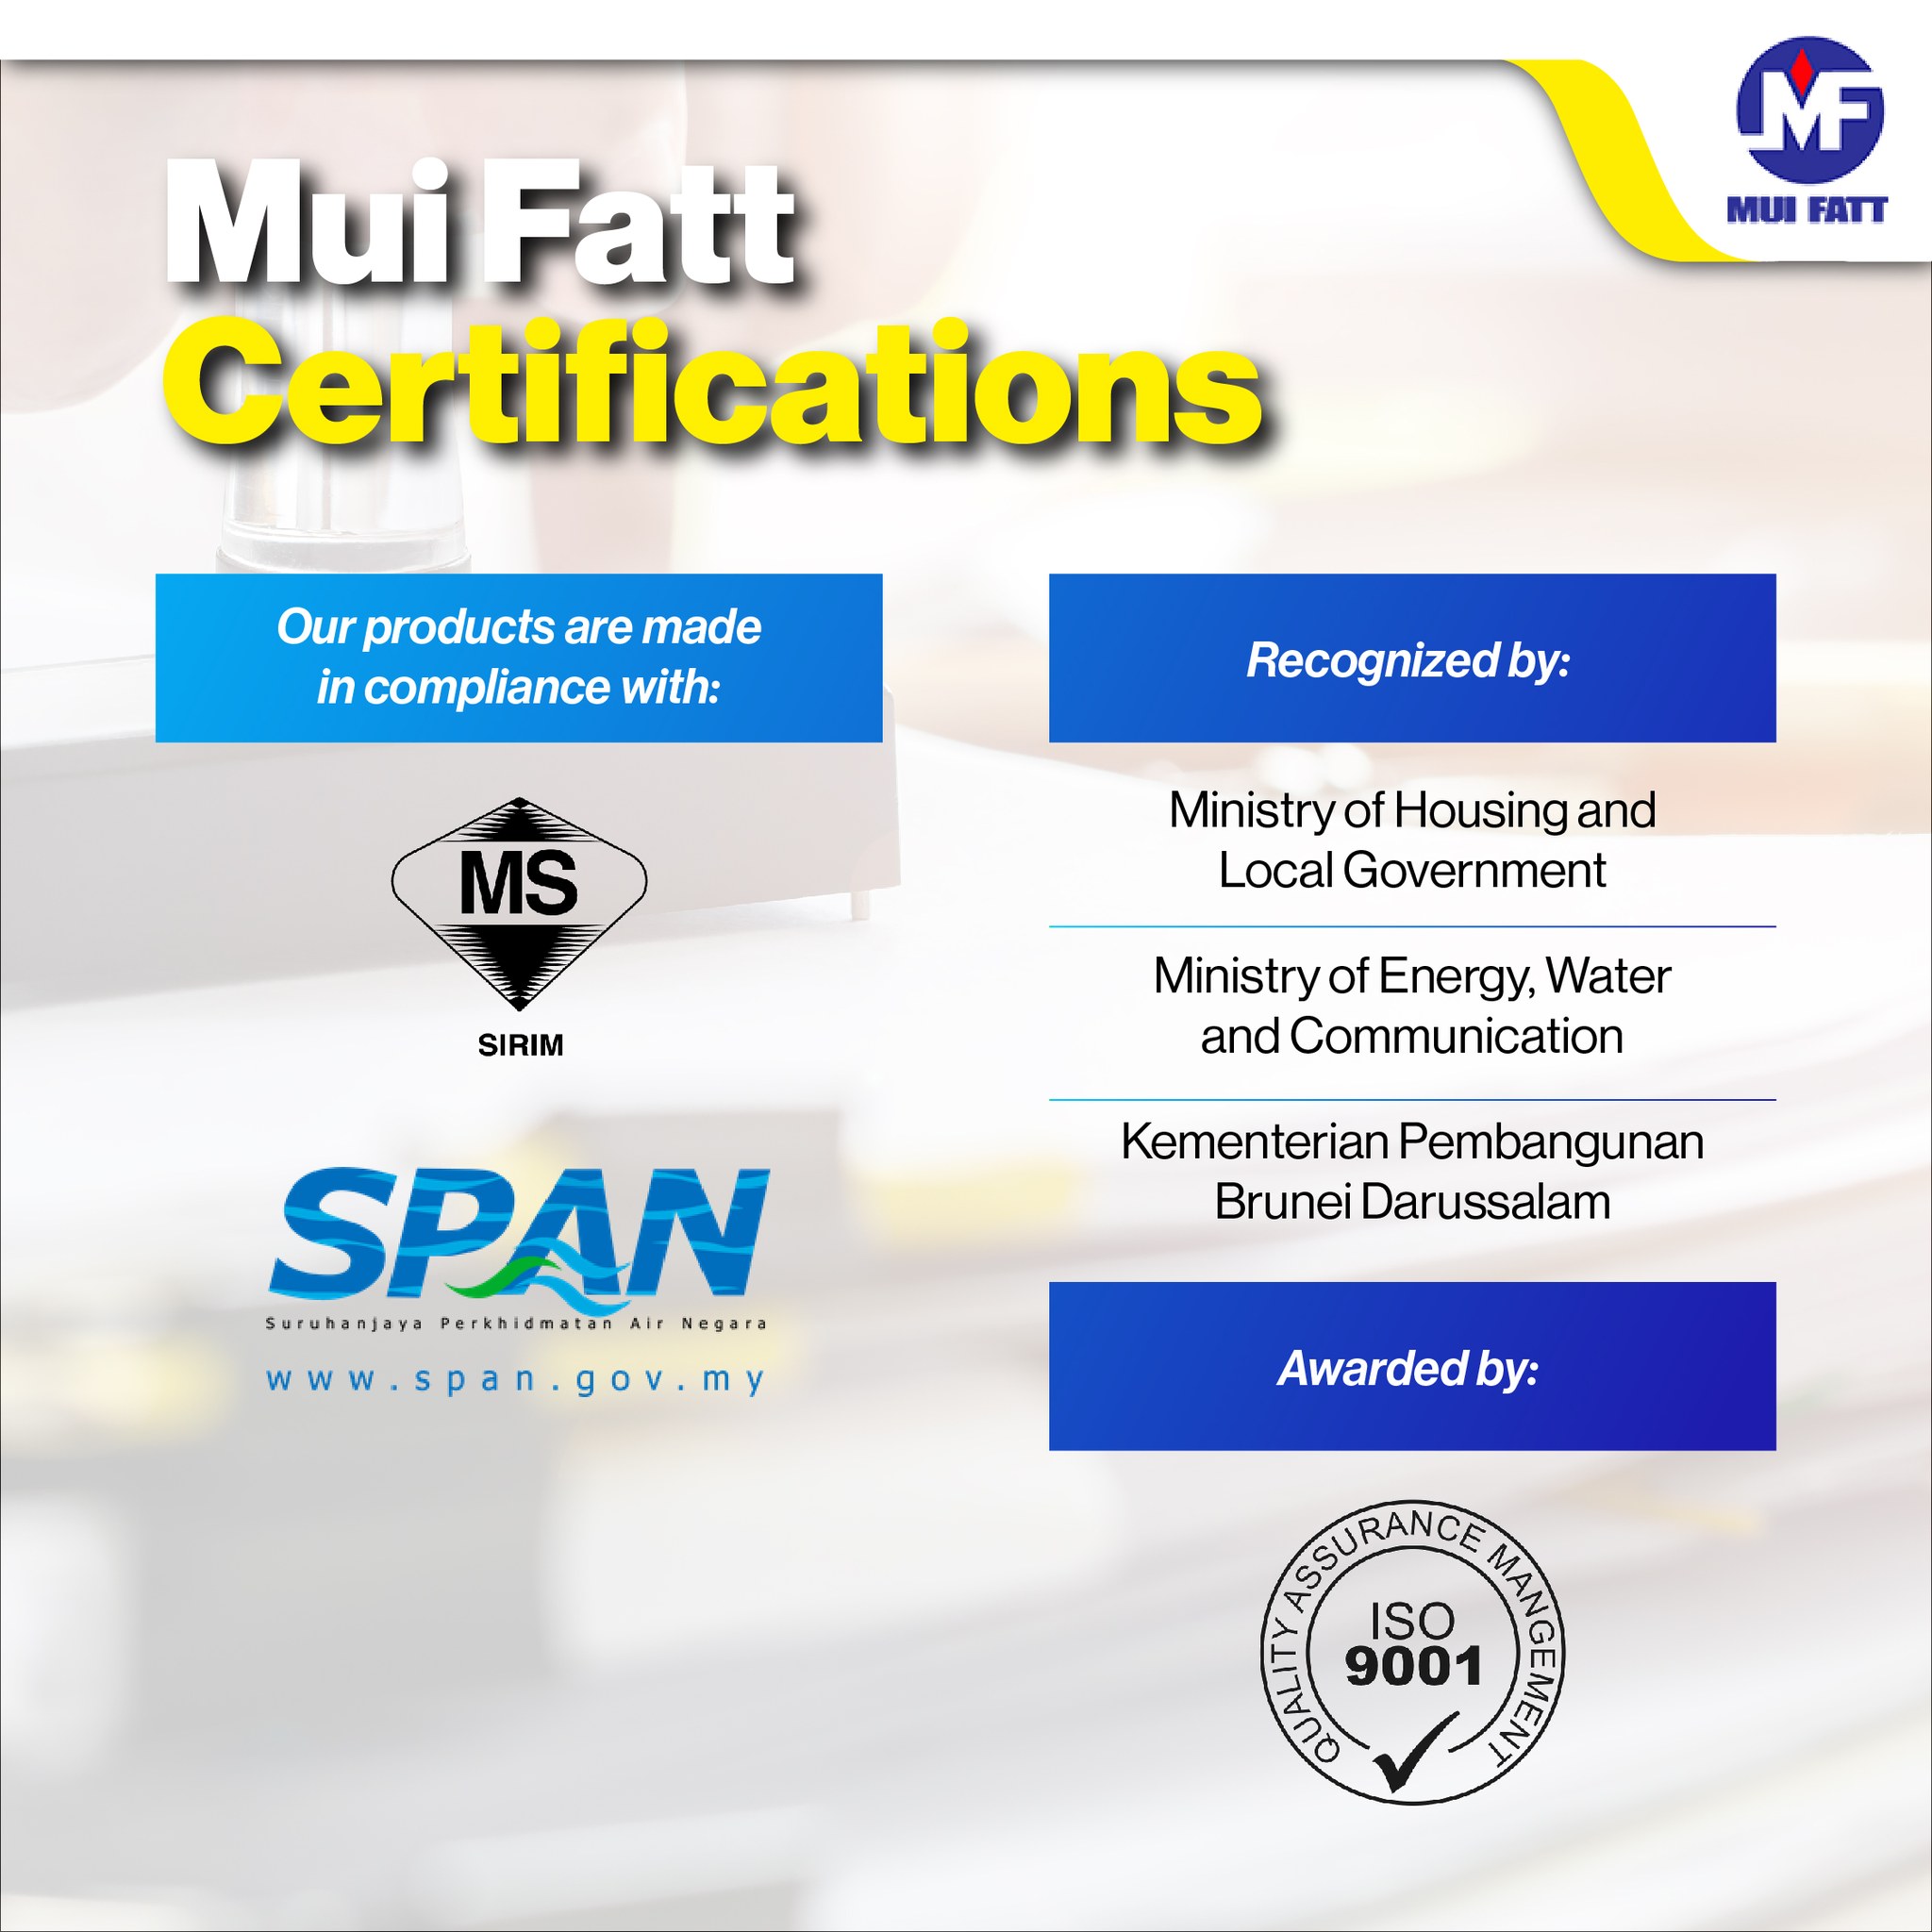 SIRIM and SPAN certification